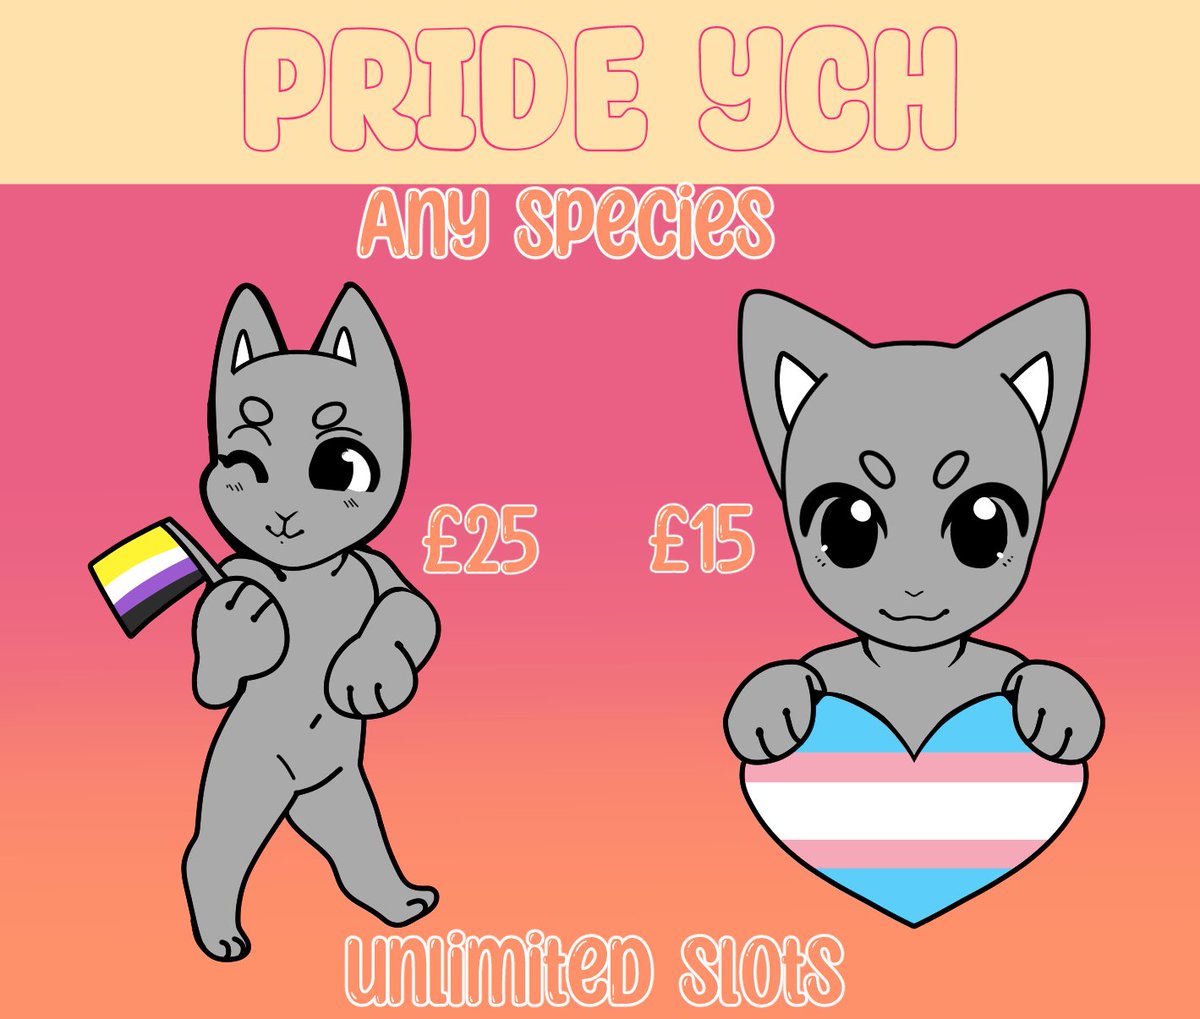 Pride YCH! 

Both are open for unlimited slots! 
Any species, humanoids also welcome! Feel free to reply or DM me (If twitt hasn't k worded that yet)